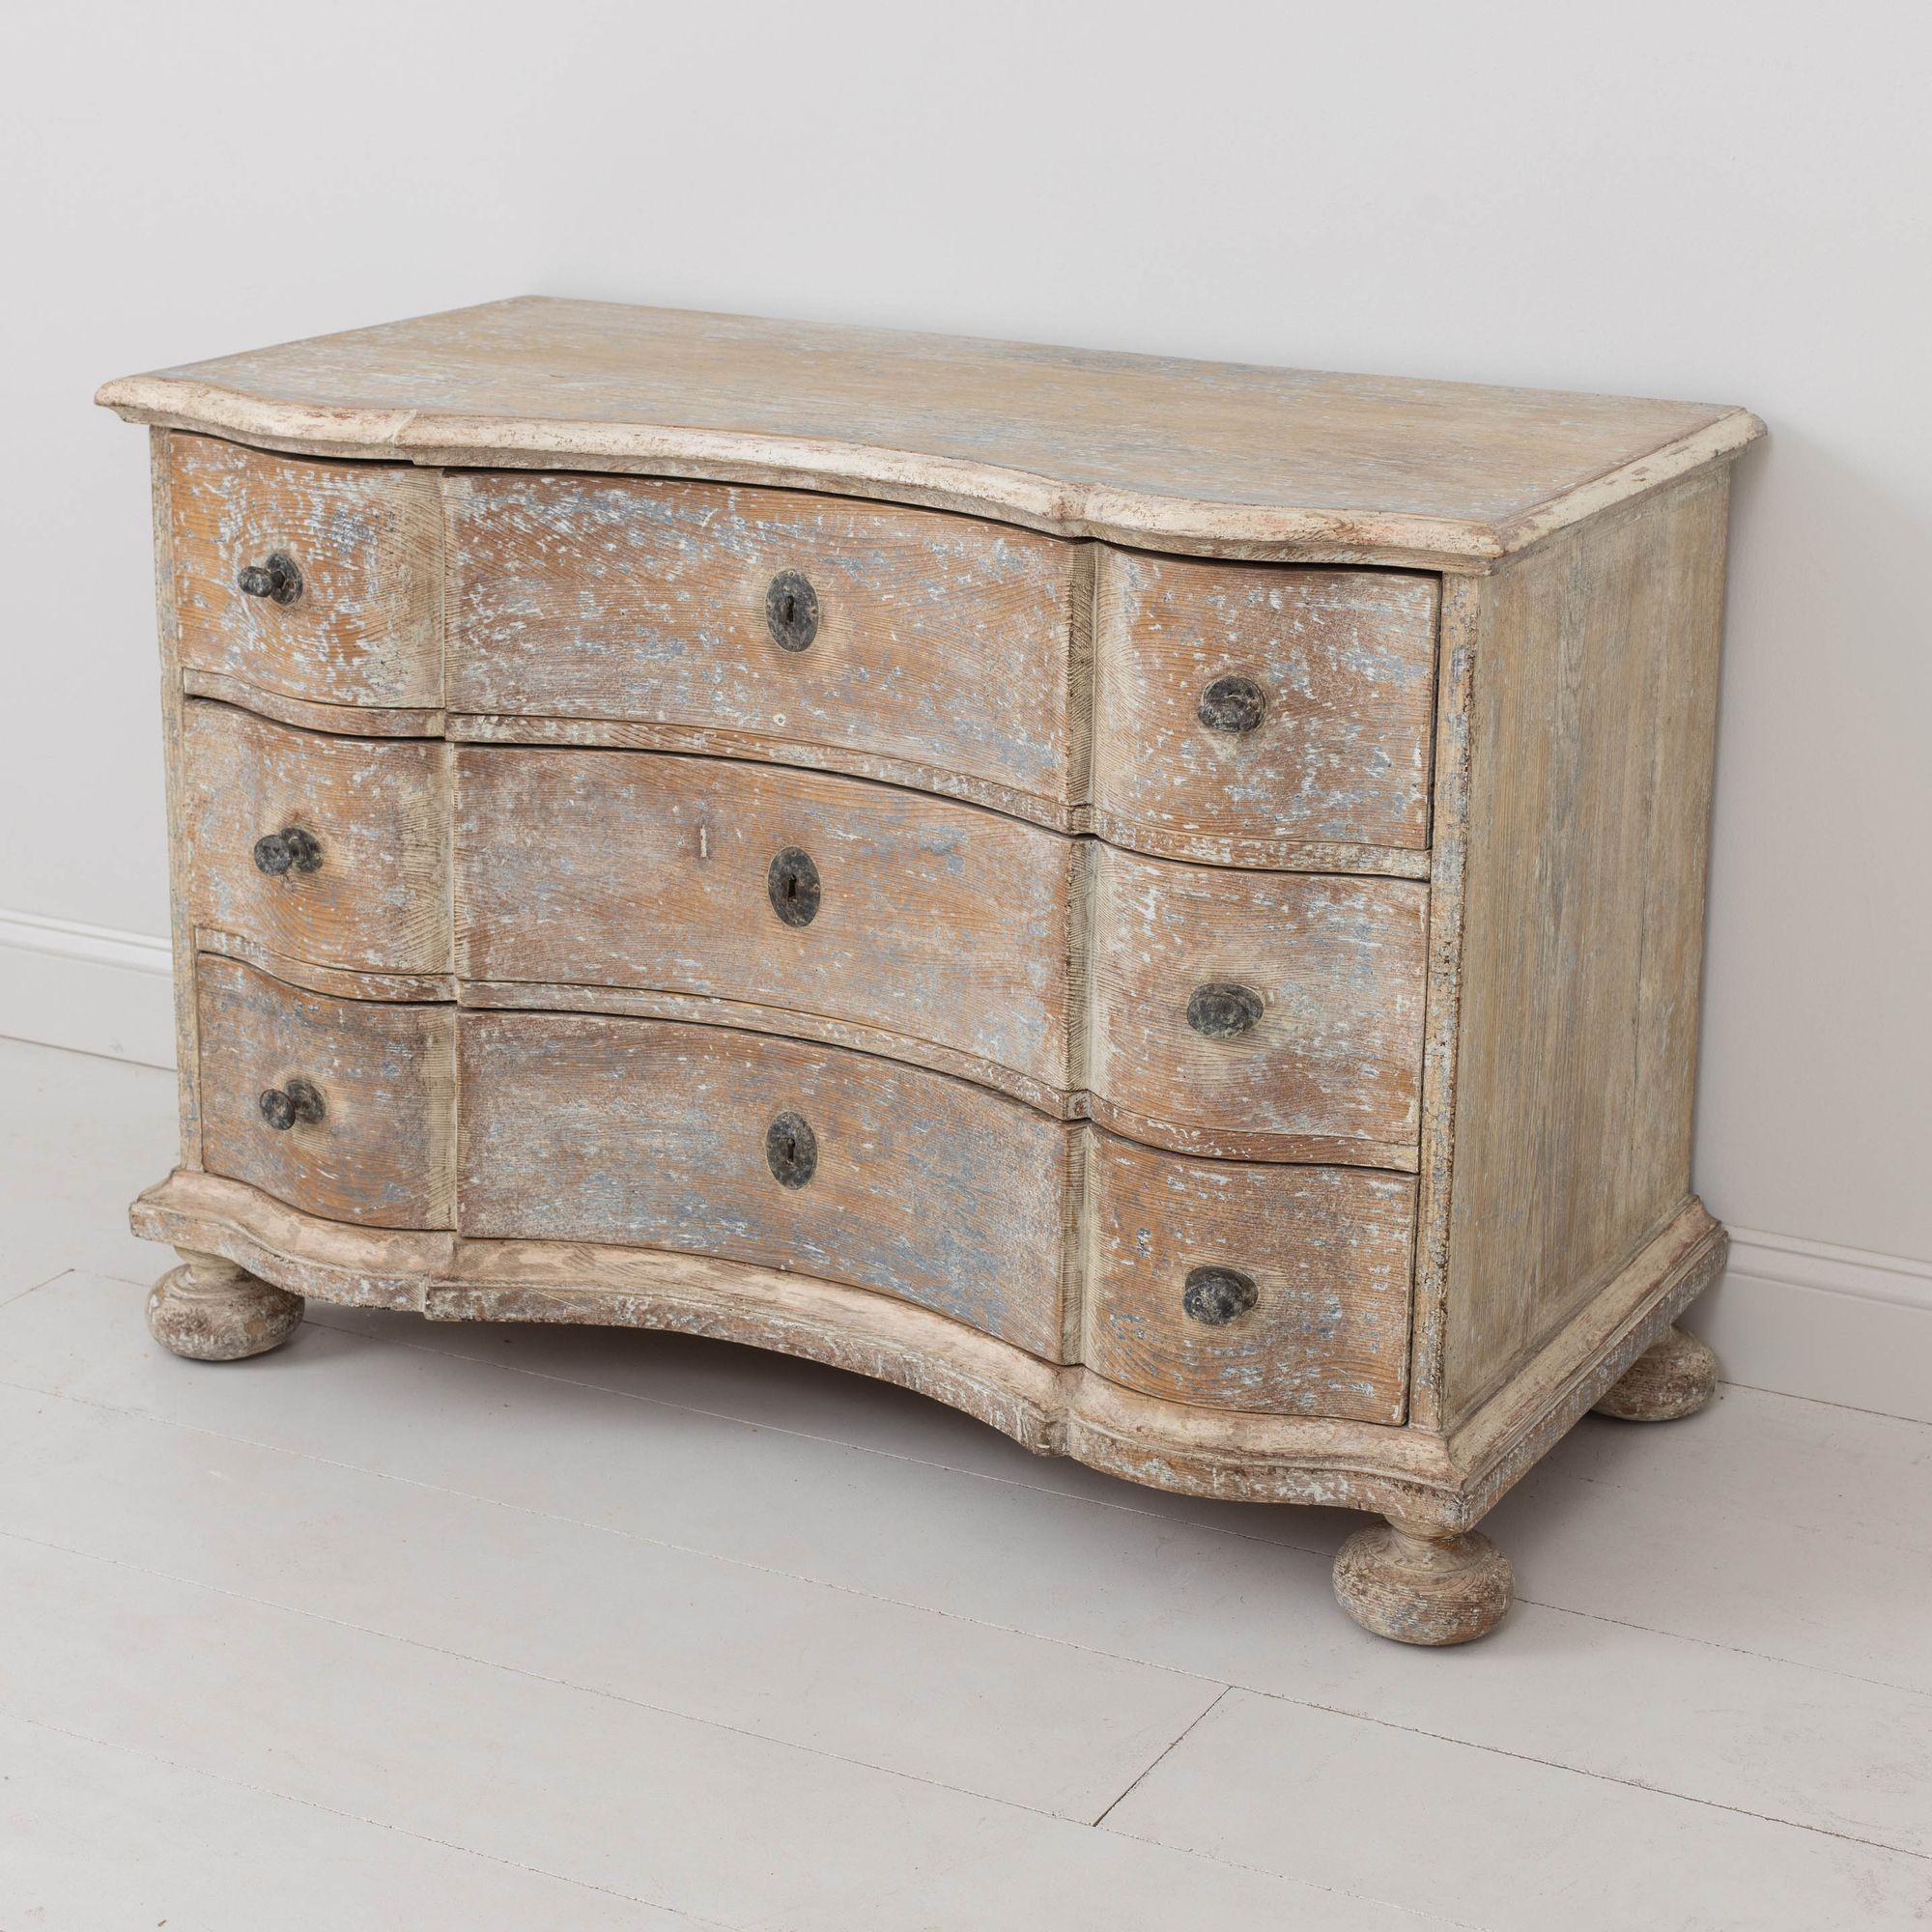 18th c. German Baroque Commode in Original Patina with Arbalette Shaped Front For Sale 3